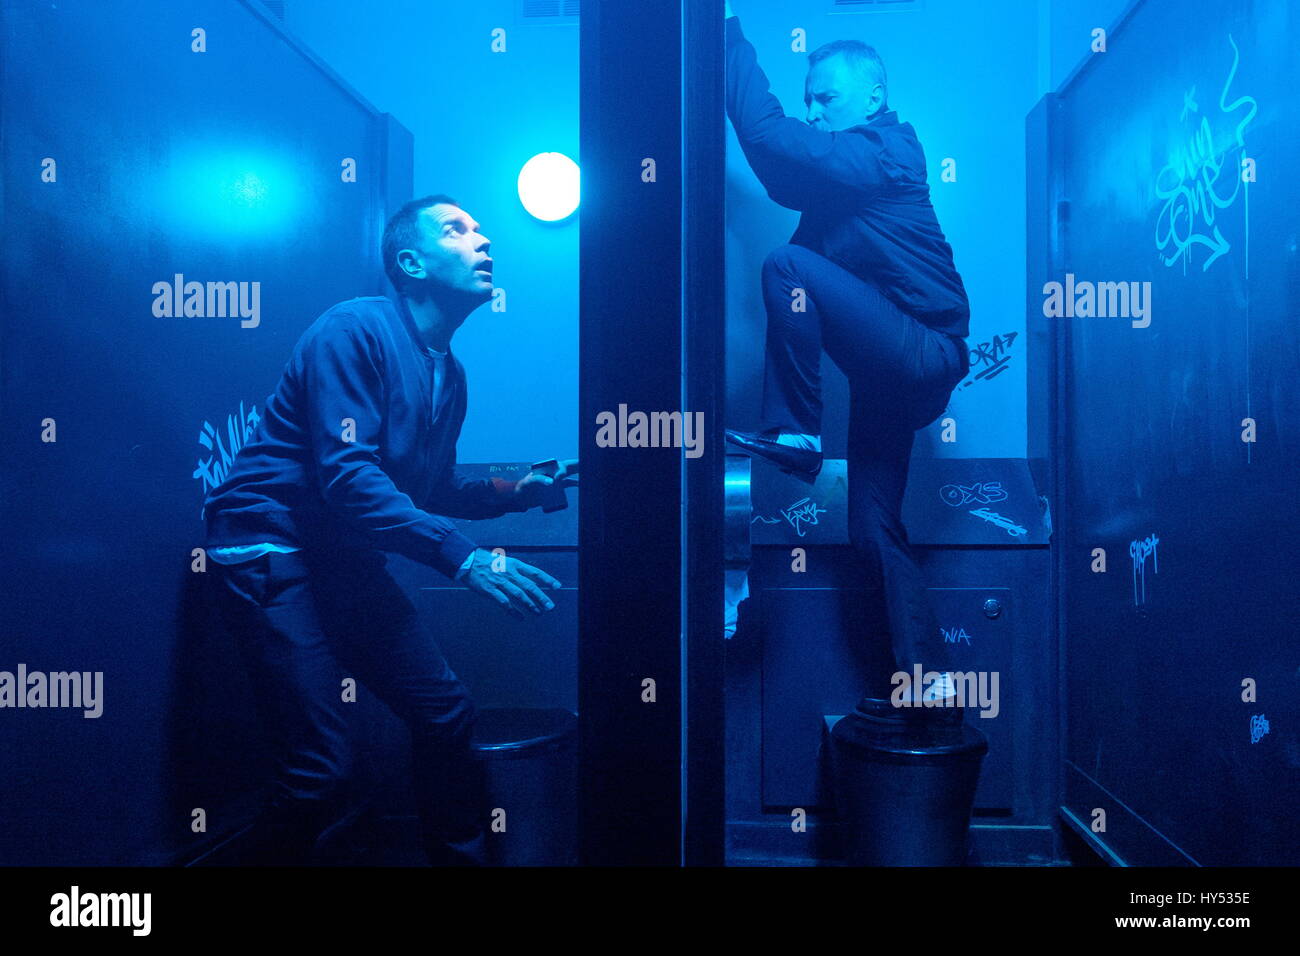 RELEASE DATE: February 10, 2017. TITLE: T2: Trainspotting. STUDIO: Sony Pictures. DIRECTOR: Danny Boyle. PLOT: A continuation of the Trainspotting saga reuniting the original characters. STARRING: Ewan McGregor, Robert Carlyle. (Credit: © Sony Pictures/Entertainment Pictures) Stock Photo